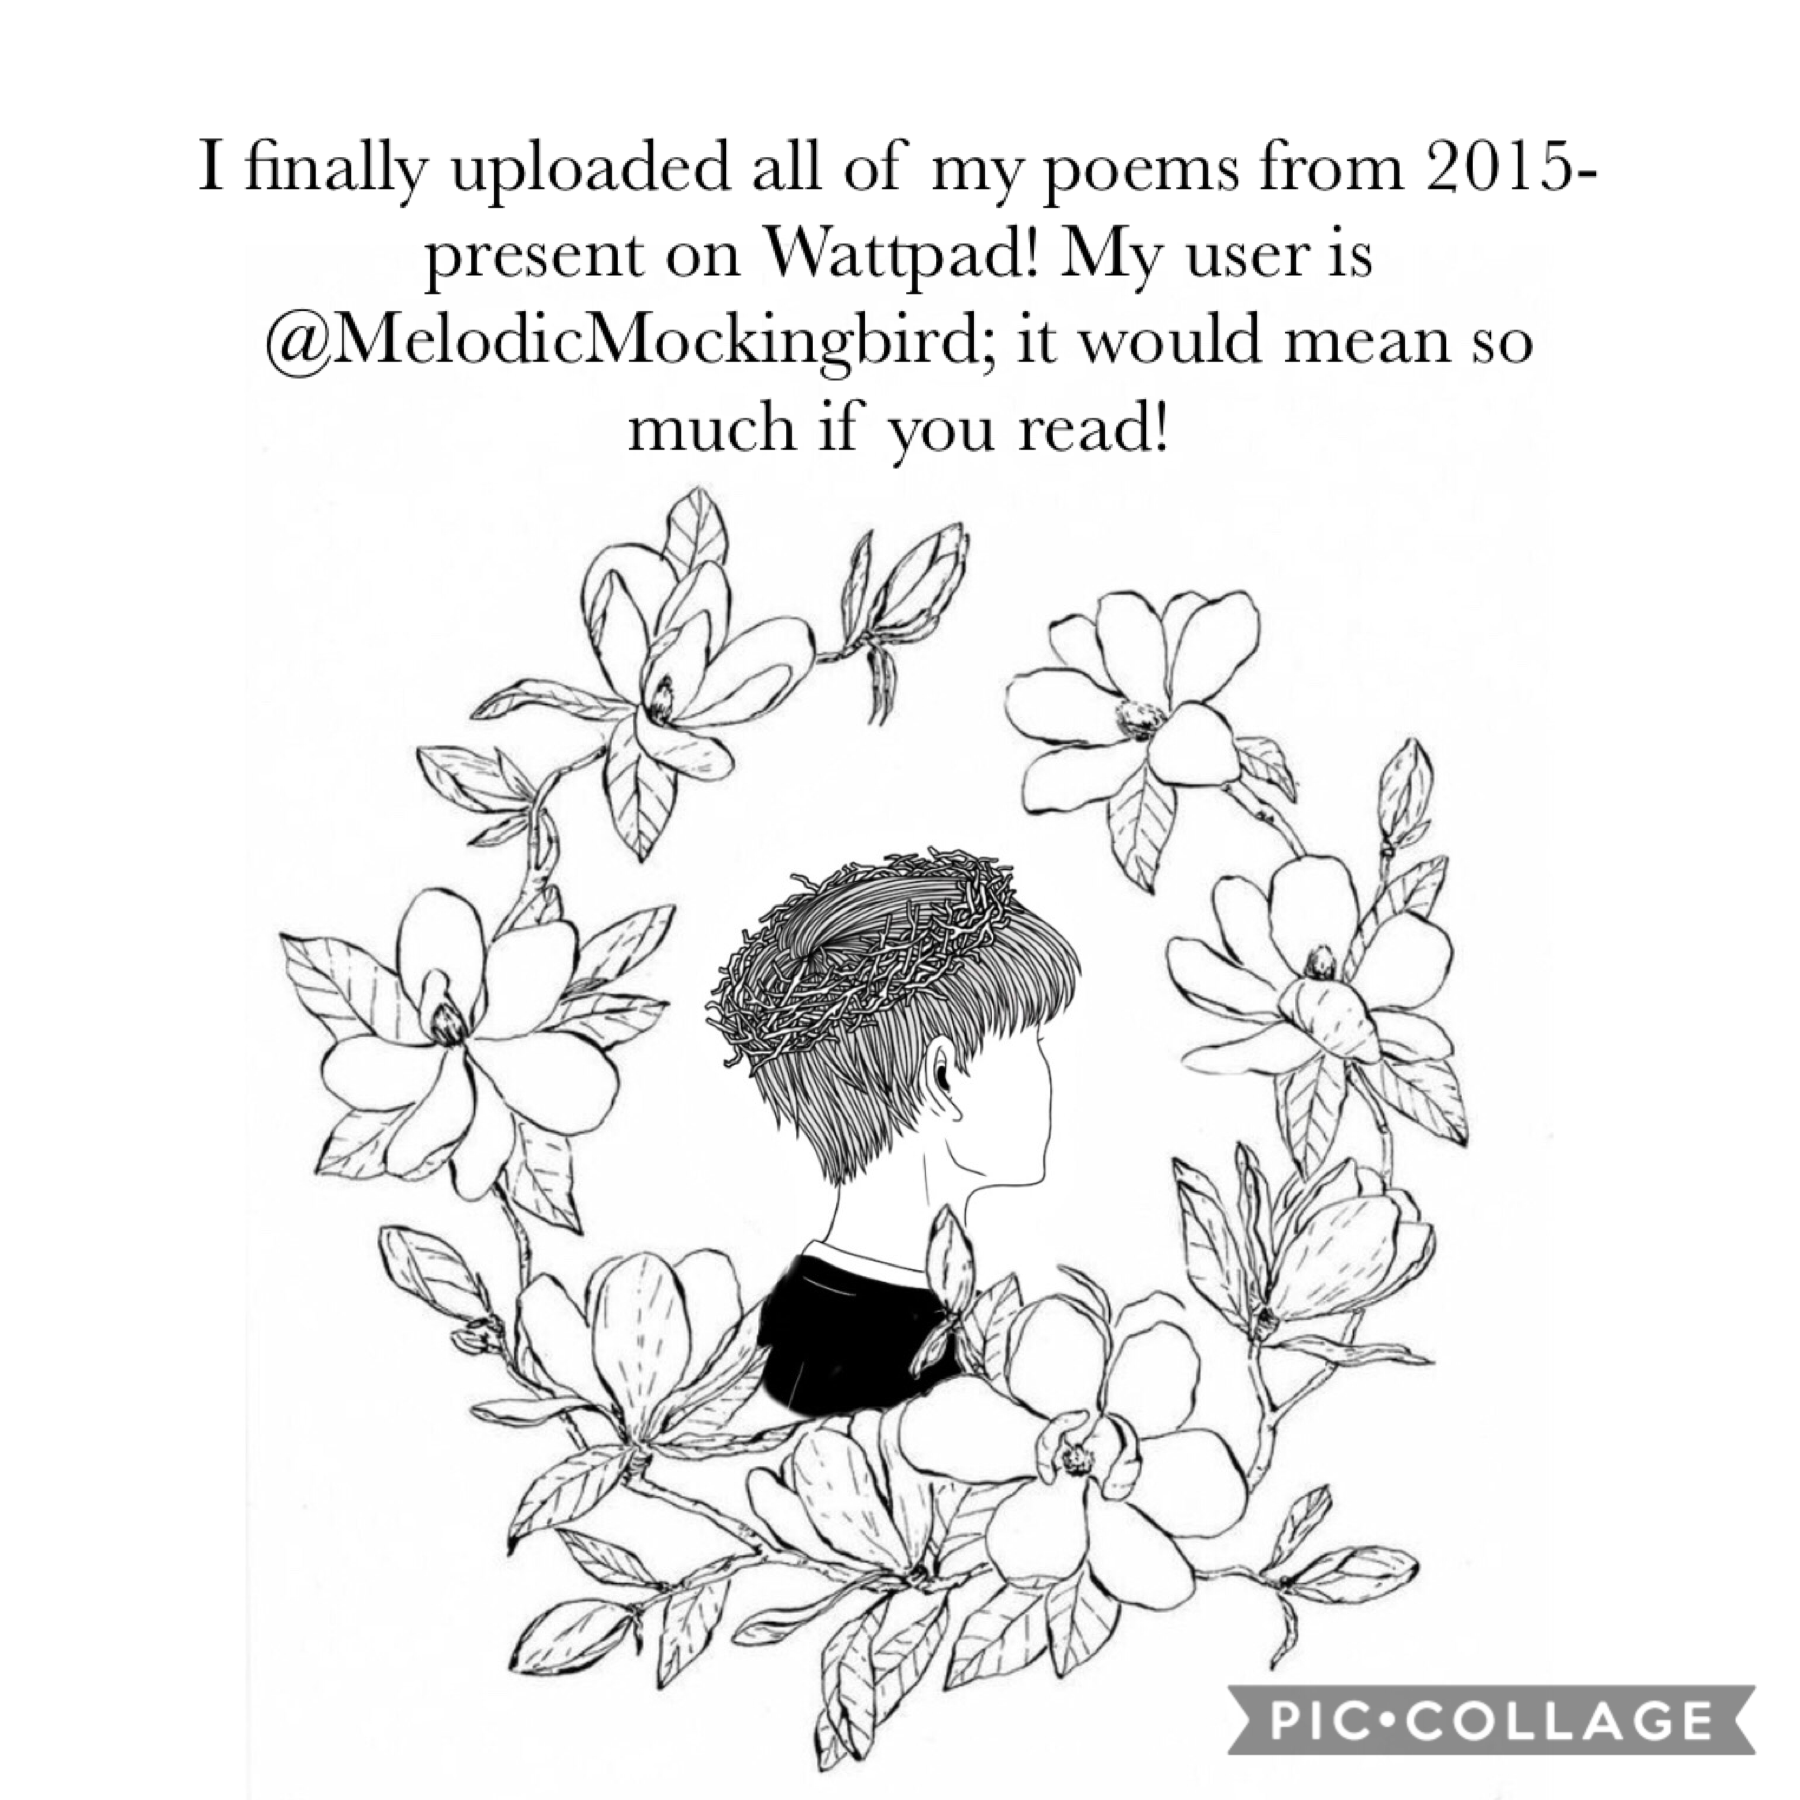 There’s a lot of parts but many are short poems. I hope y’all enjoy! If y’all have watt pads I’d love to follow and read; comment them below! 